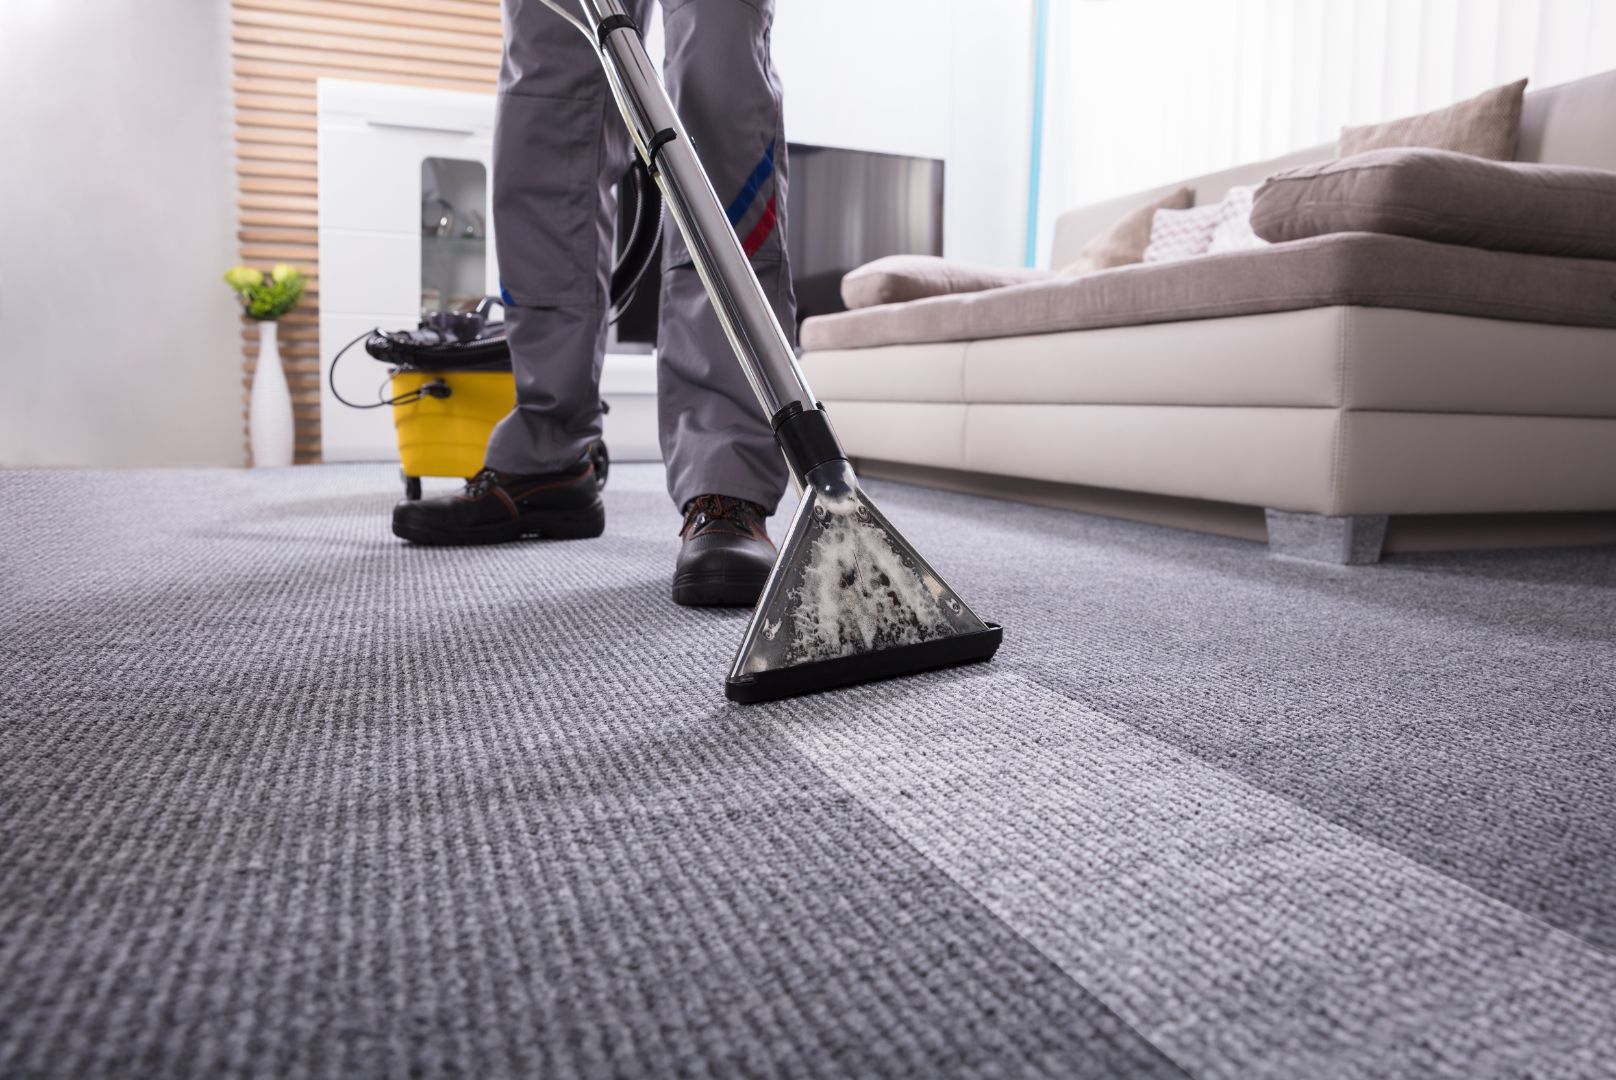 A person is cleaning a carpet with a vacuum cleaner in a living room.